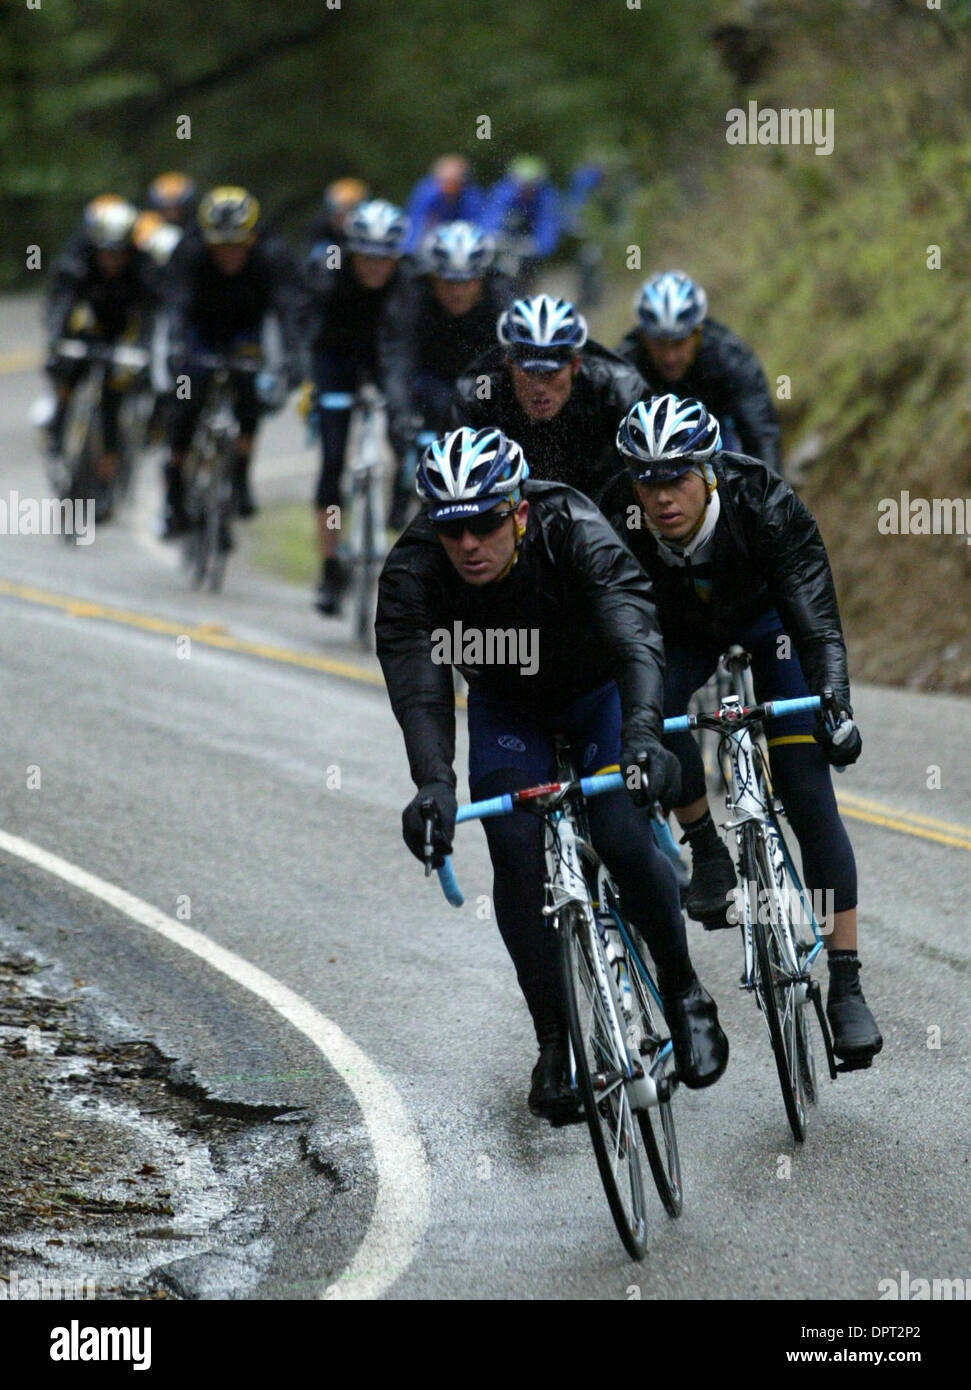 Riders in the Peloton make their way along a section of Calaveras Road during the Amgen Tour of California Tuesday February 17, 2009 in Sunol, Calif. Tuesday's third stage sees riders race one hundred and four miles from San Jose to Modesto. (Anda Chu/Staff) Stock Photo